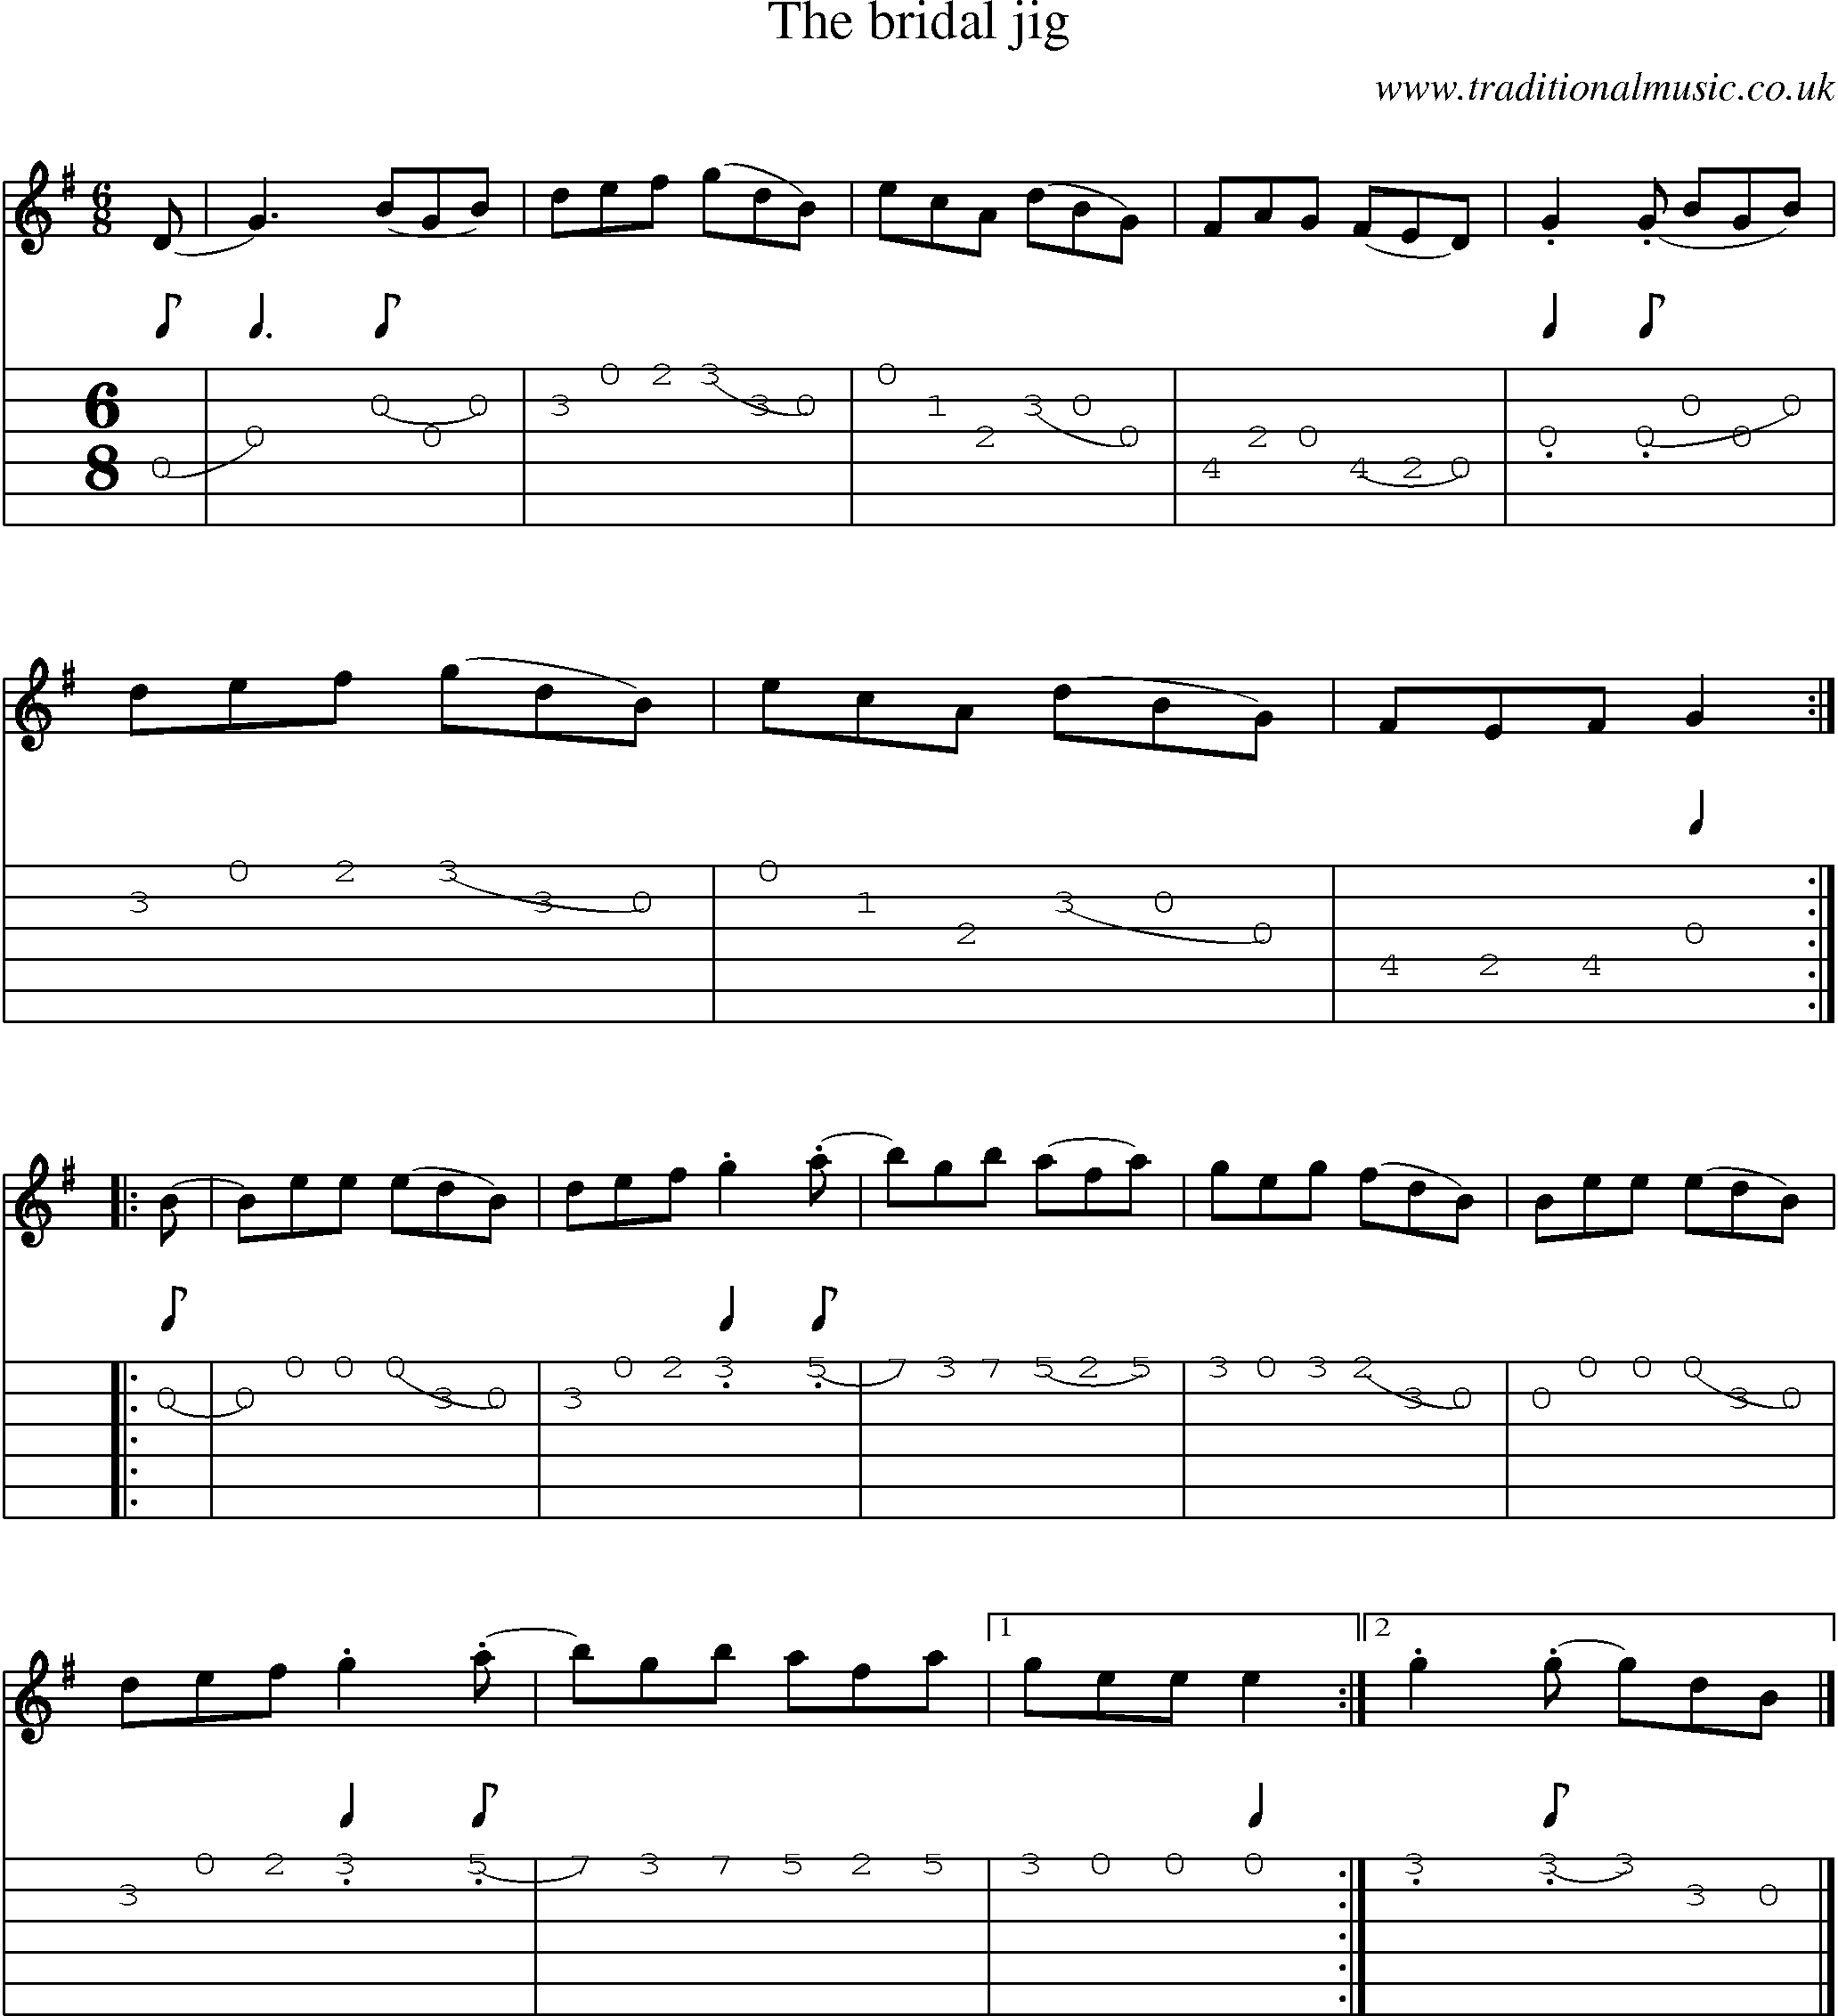 Music Score and Guitar Tabs for Bridal Jig